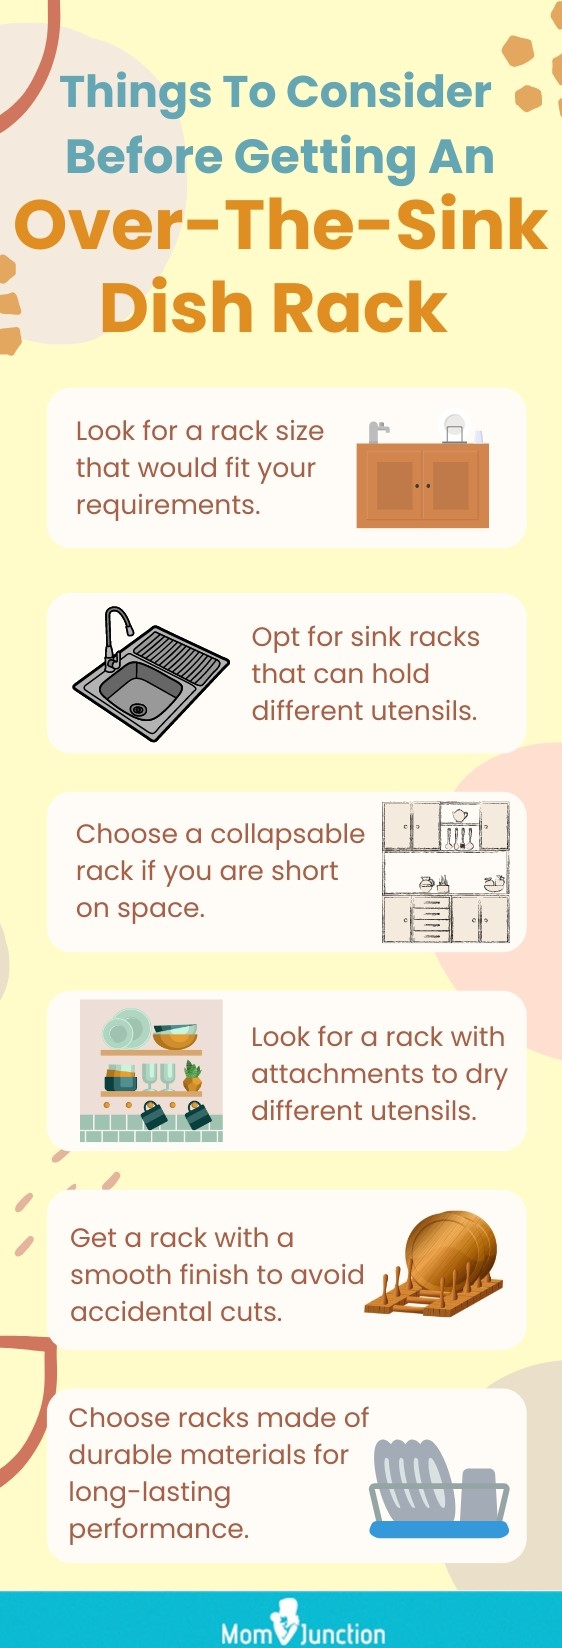 Things To Consider Before Getting An Over-The-Sink Dish Rack (infographic)